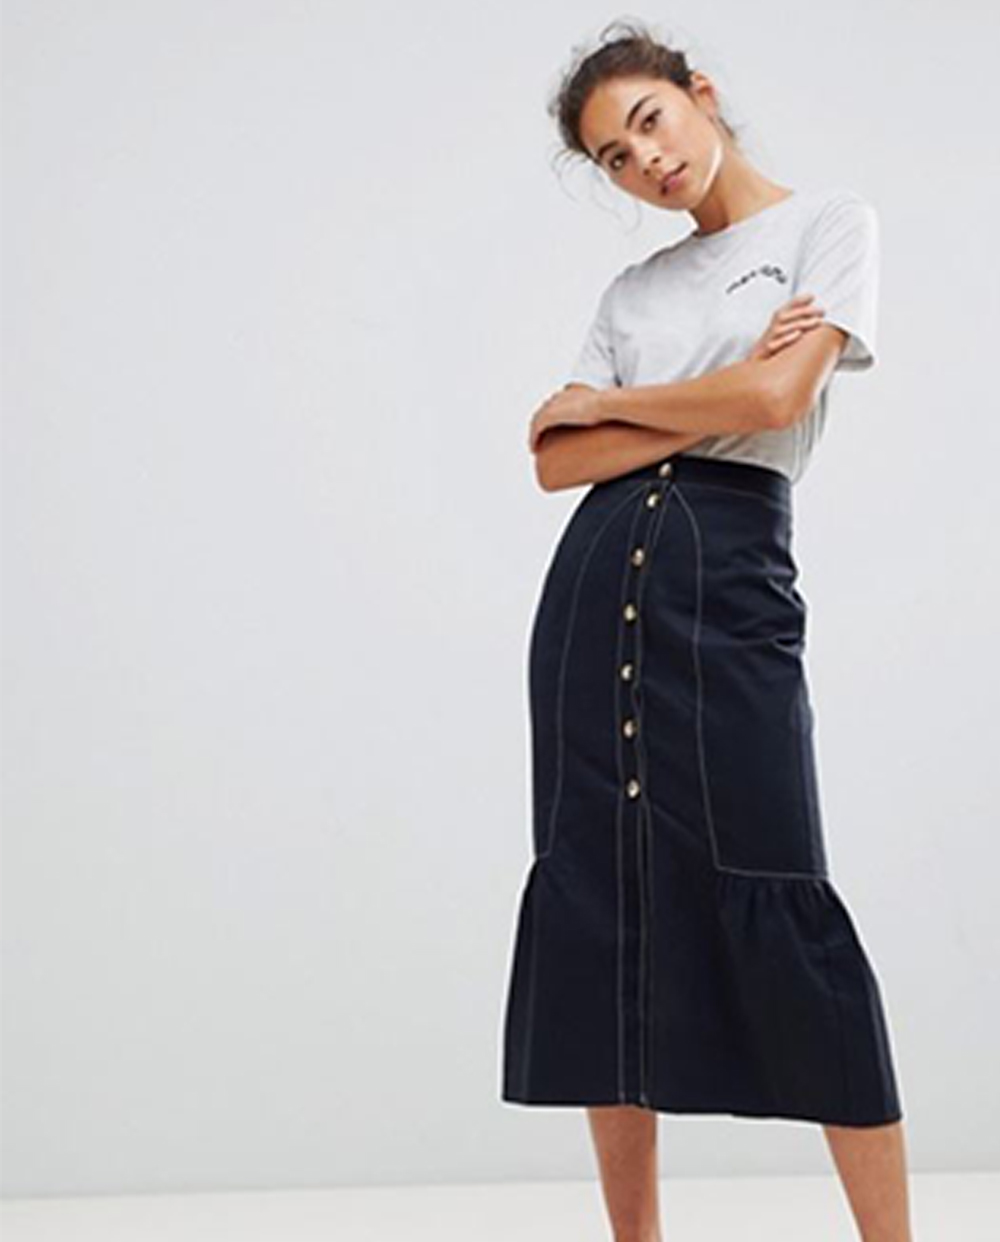 30+ Items We Can't Believe Are On Sale Right Now And We're #AddingToCart | Midi Skirt with Buttons and Contrast Stitching, $61.68 (was $77.10) from Asos.